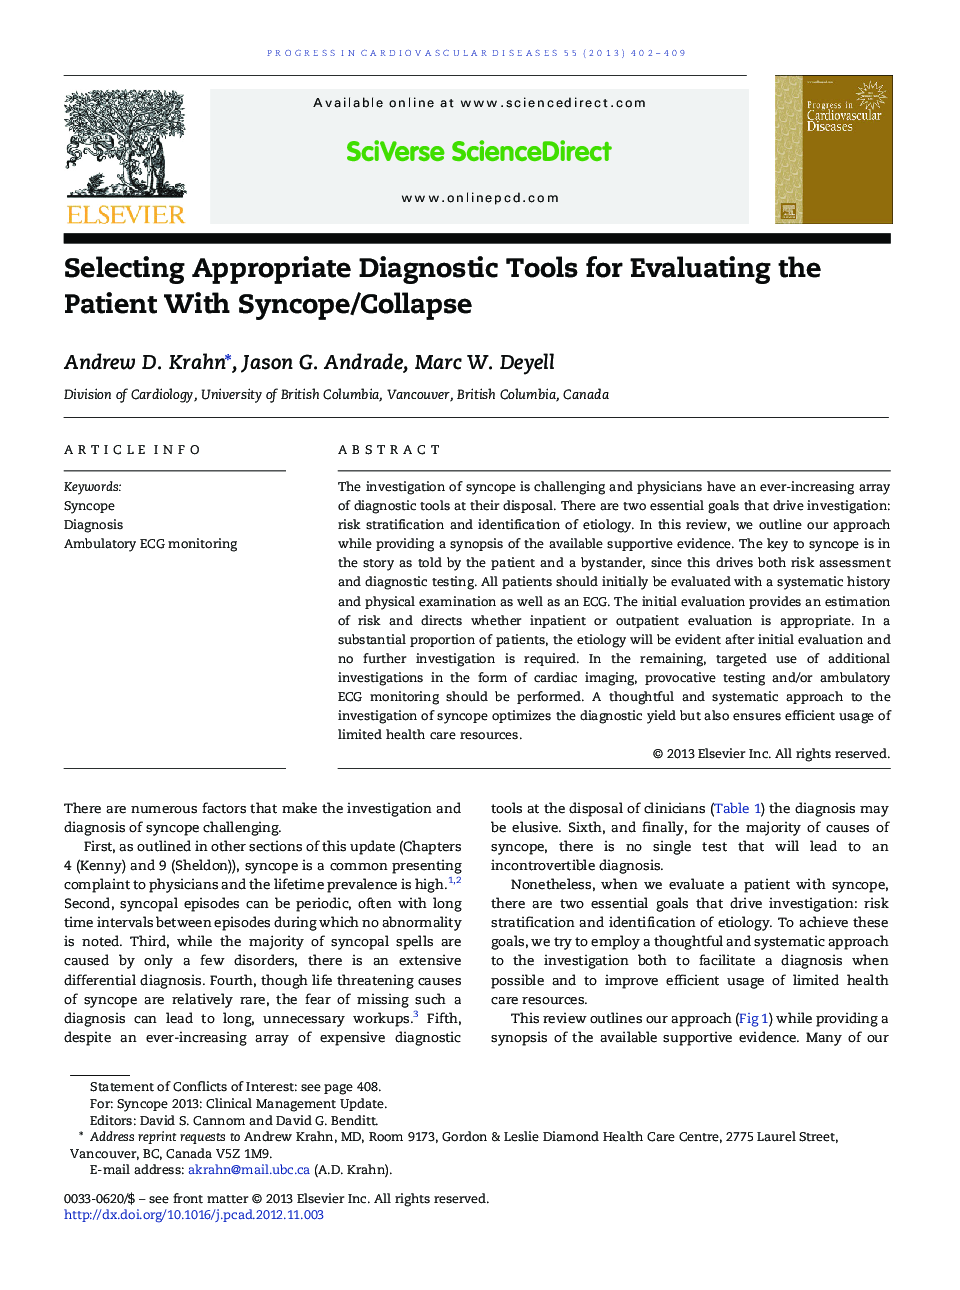 Selecting Appropriate Diagnostic Tools for Evaluating the Patient With Syncope/Collapse 